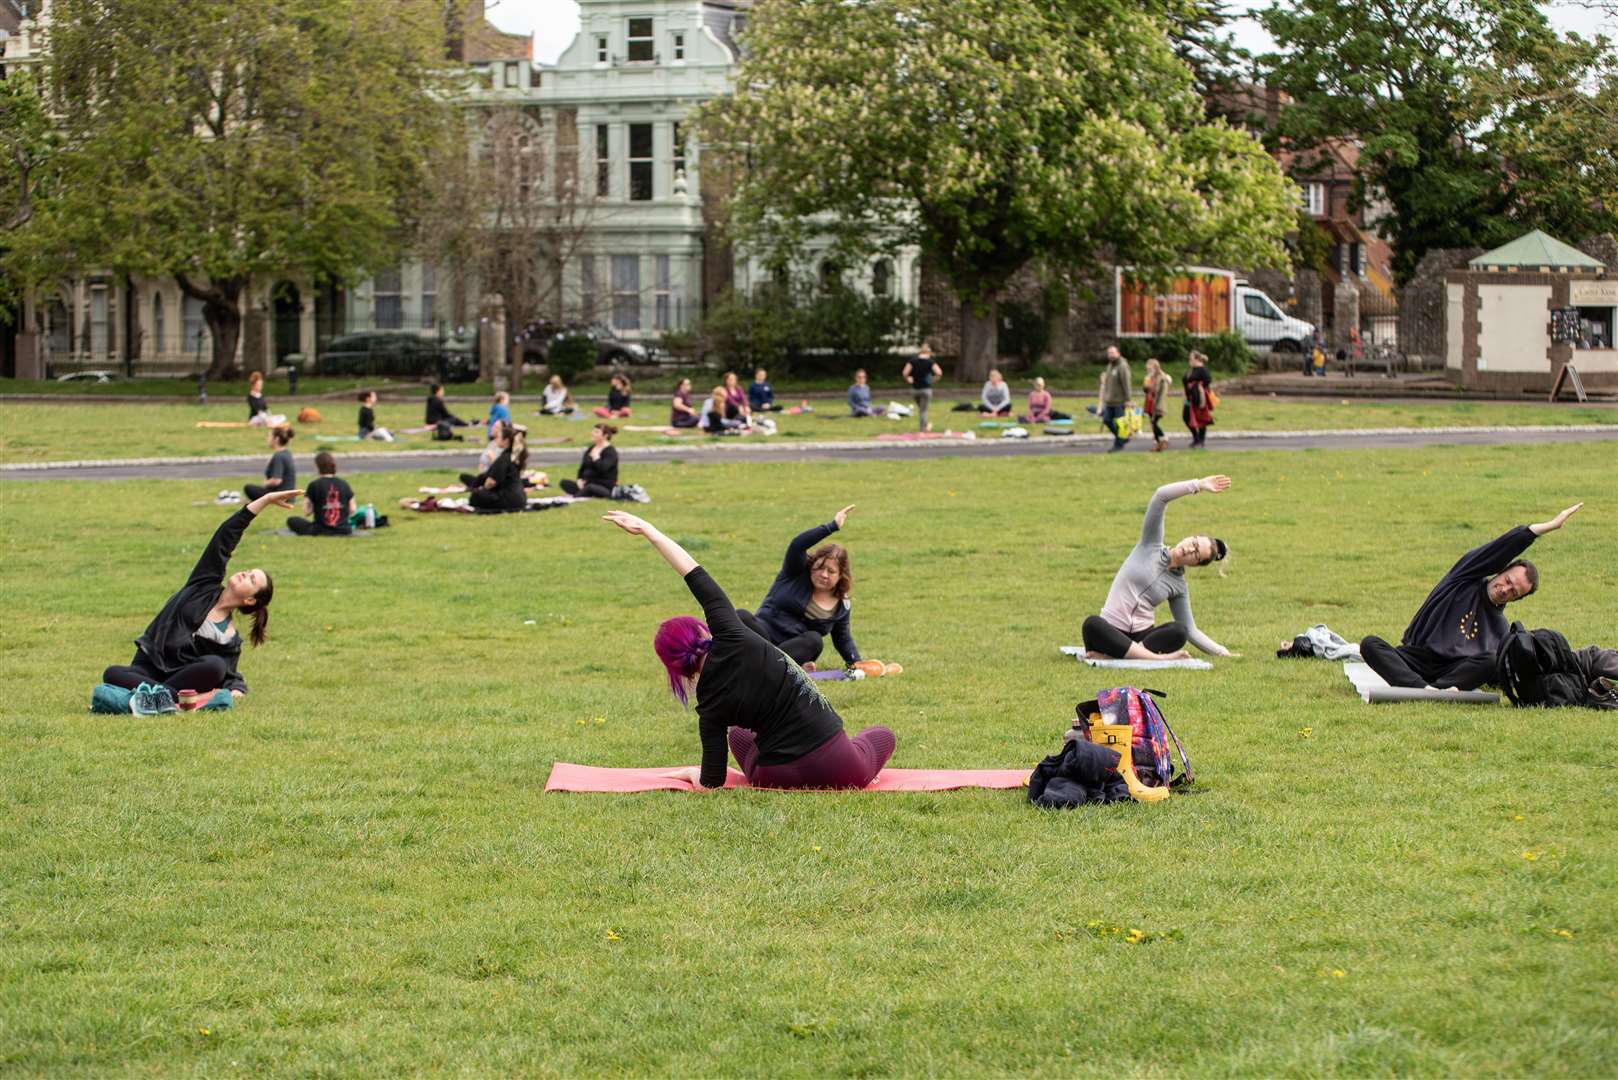 Free yoga session at Castle Gardens, Rochester